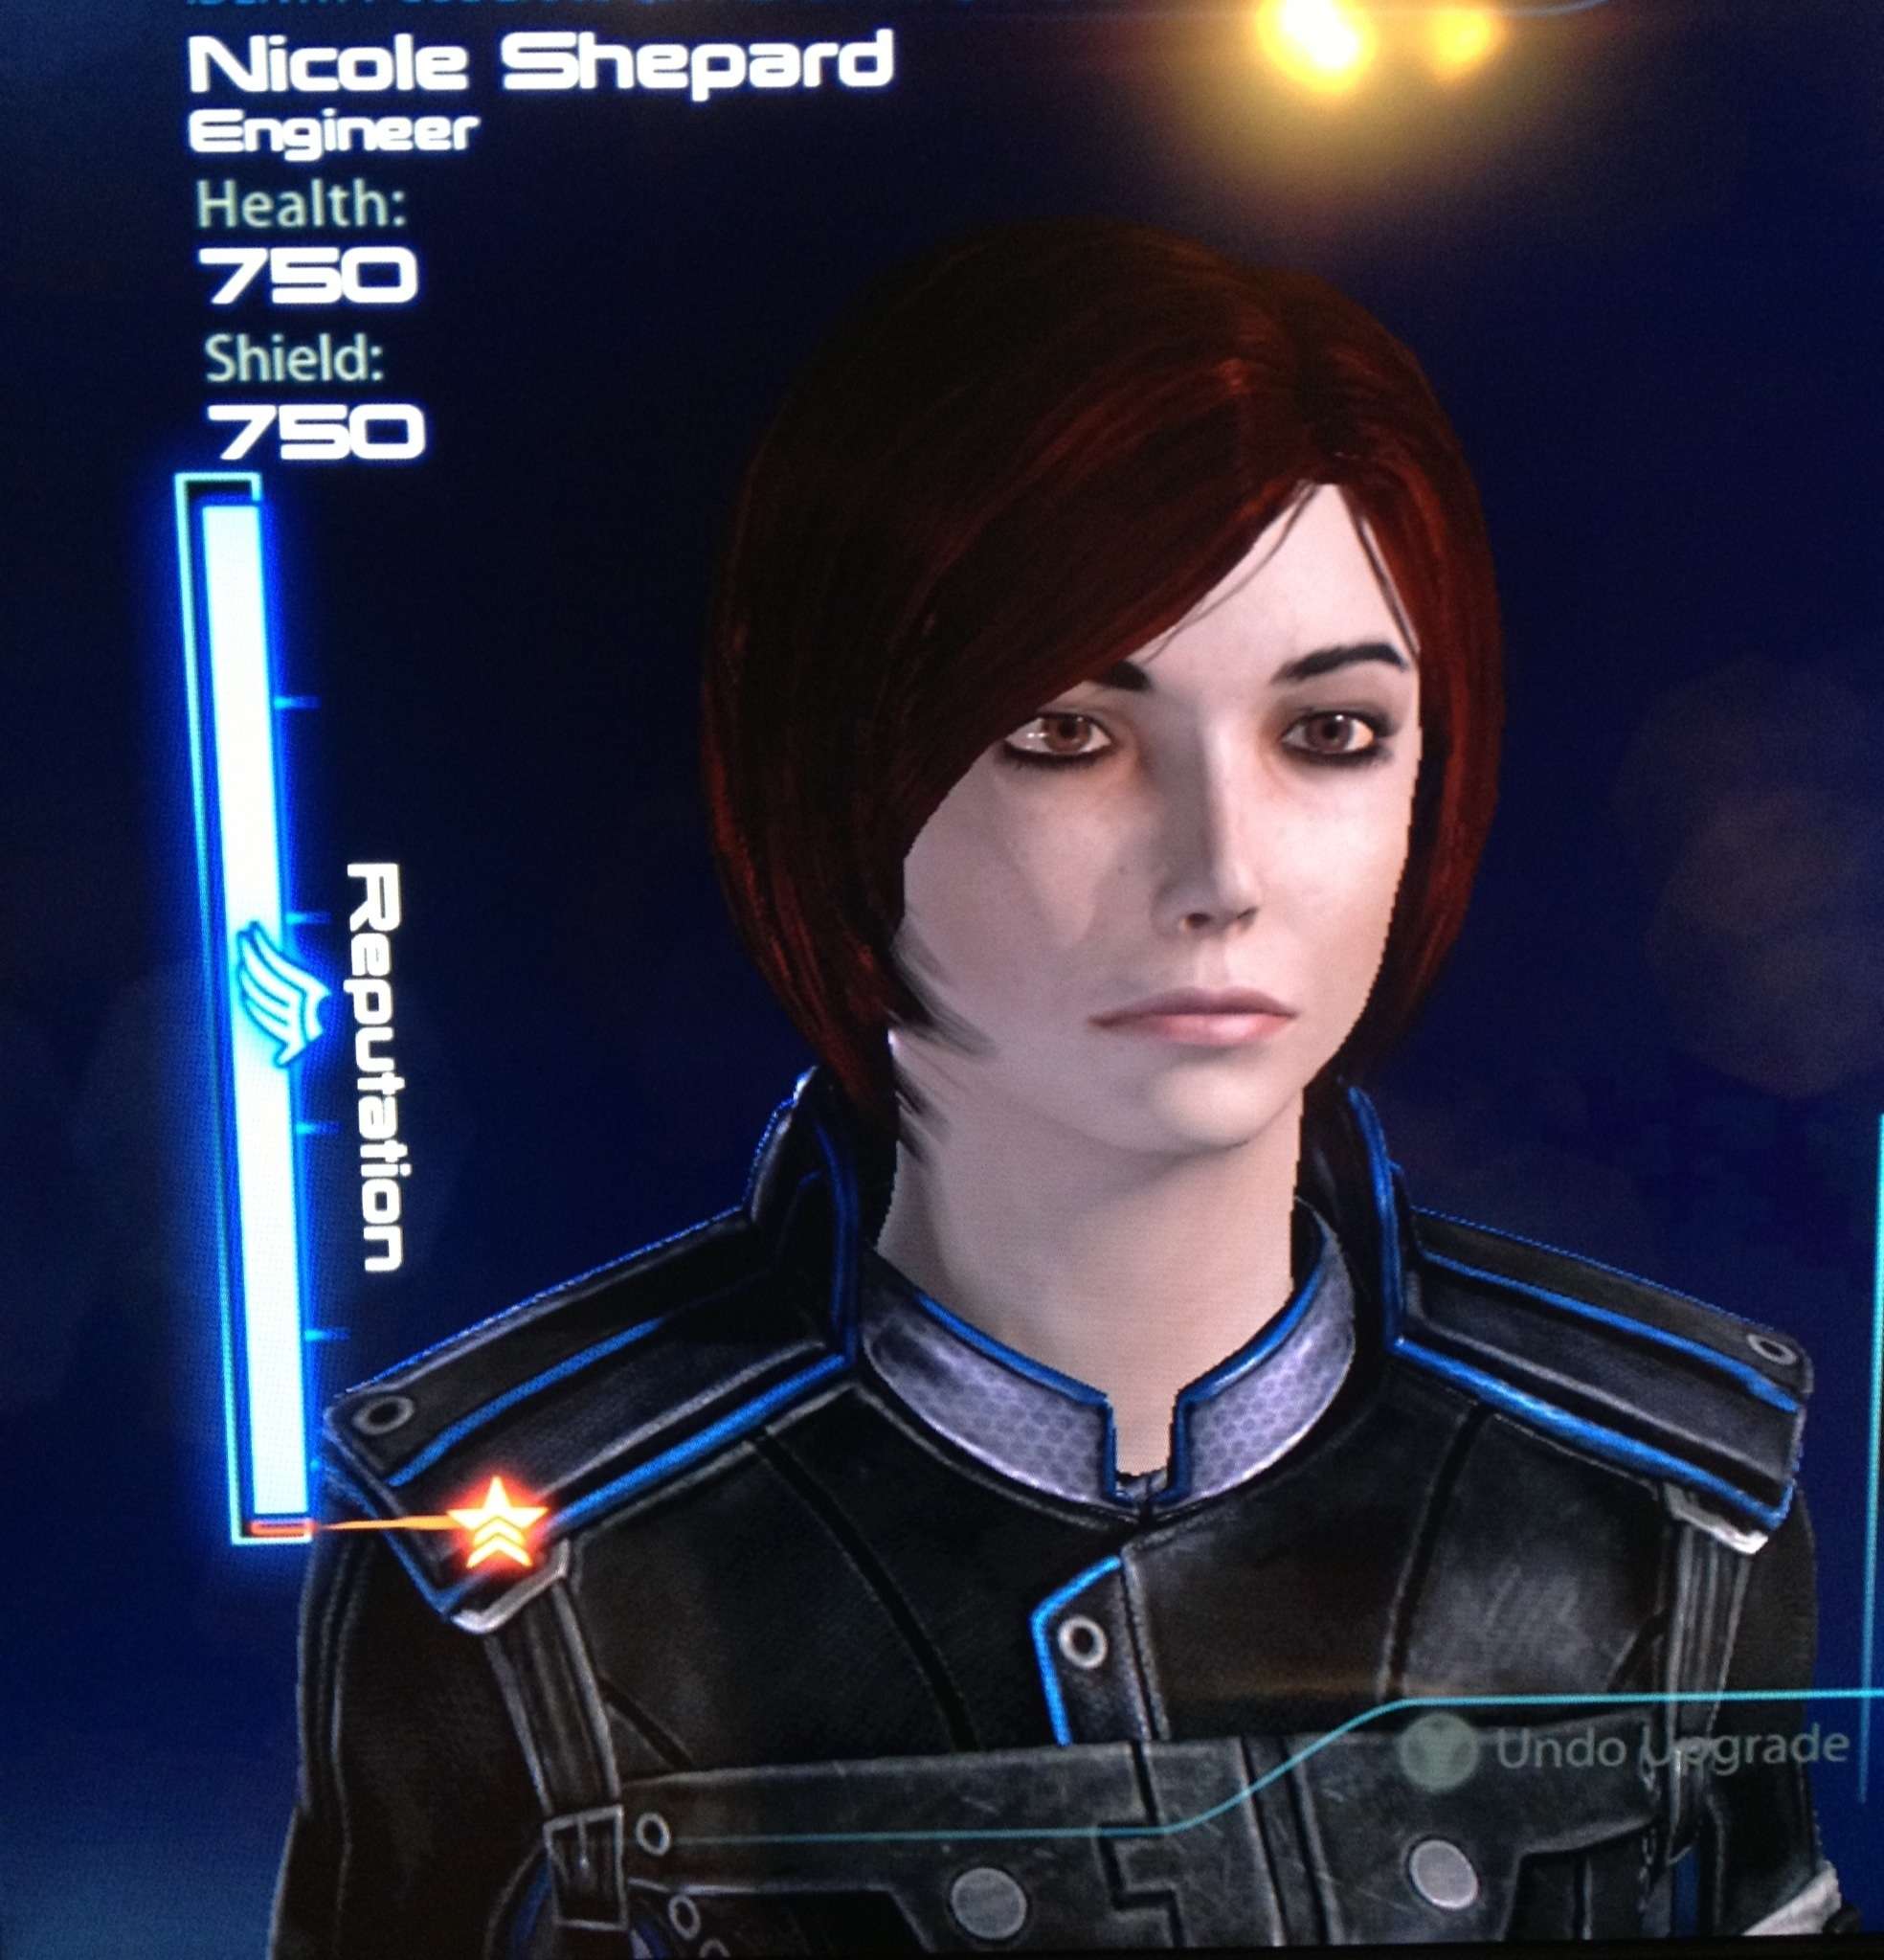 I'm Commander Shepard, and this is my least favorite business model on the Citadel.